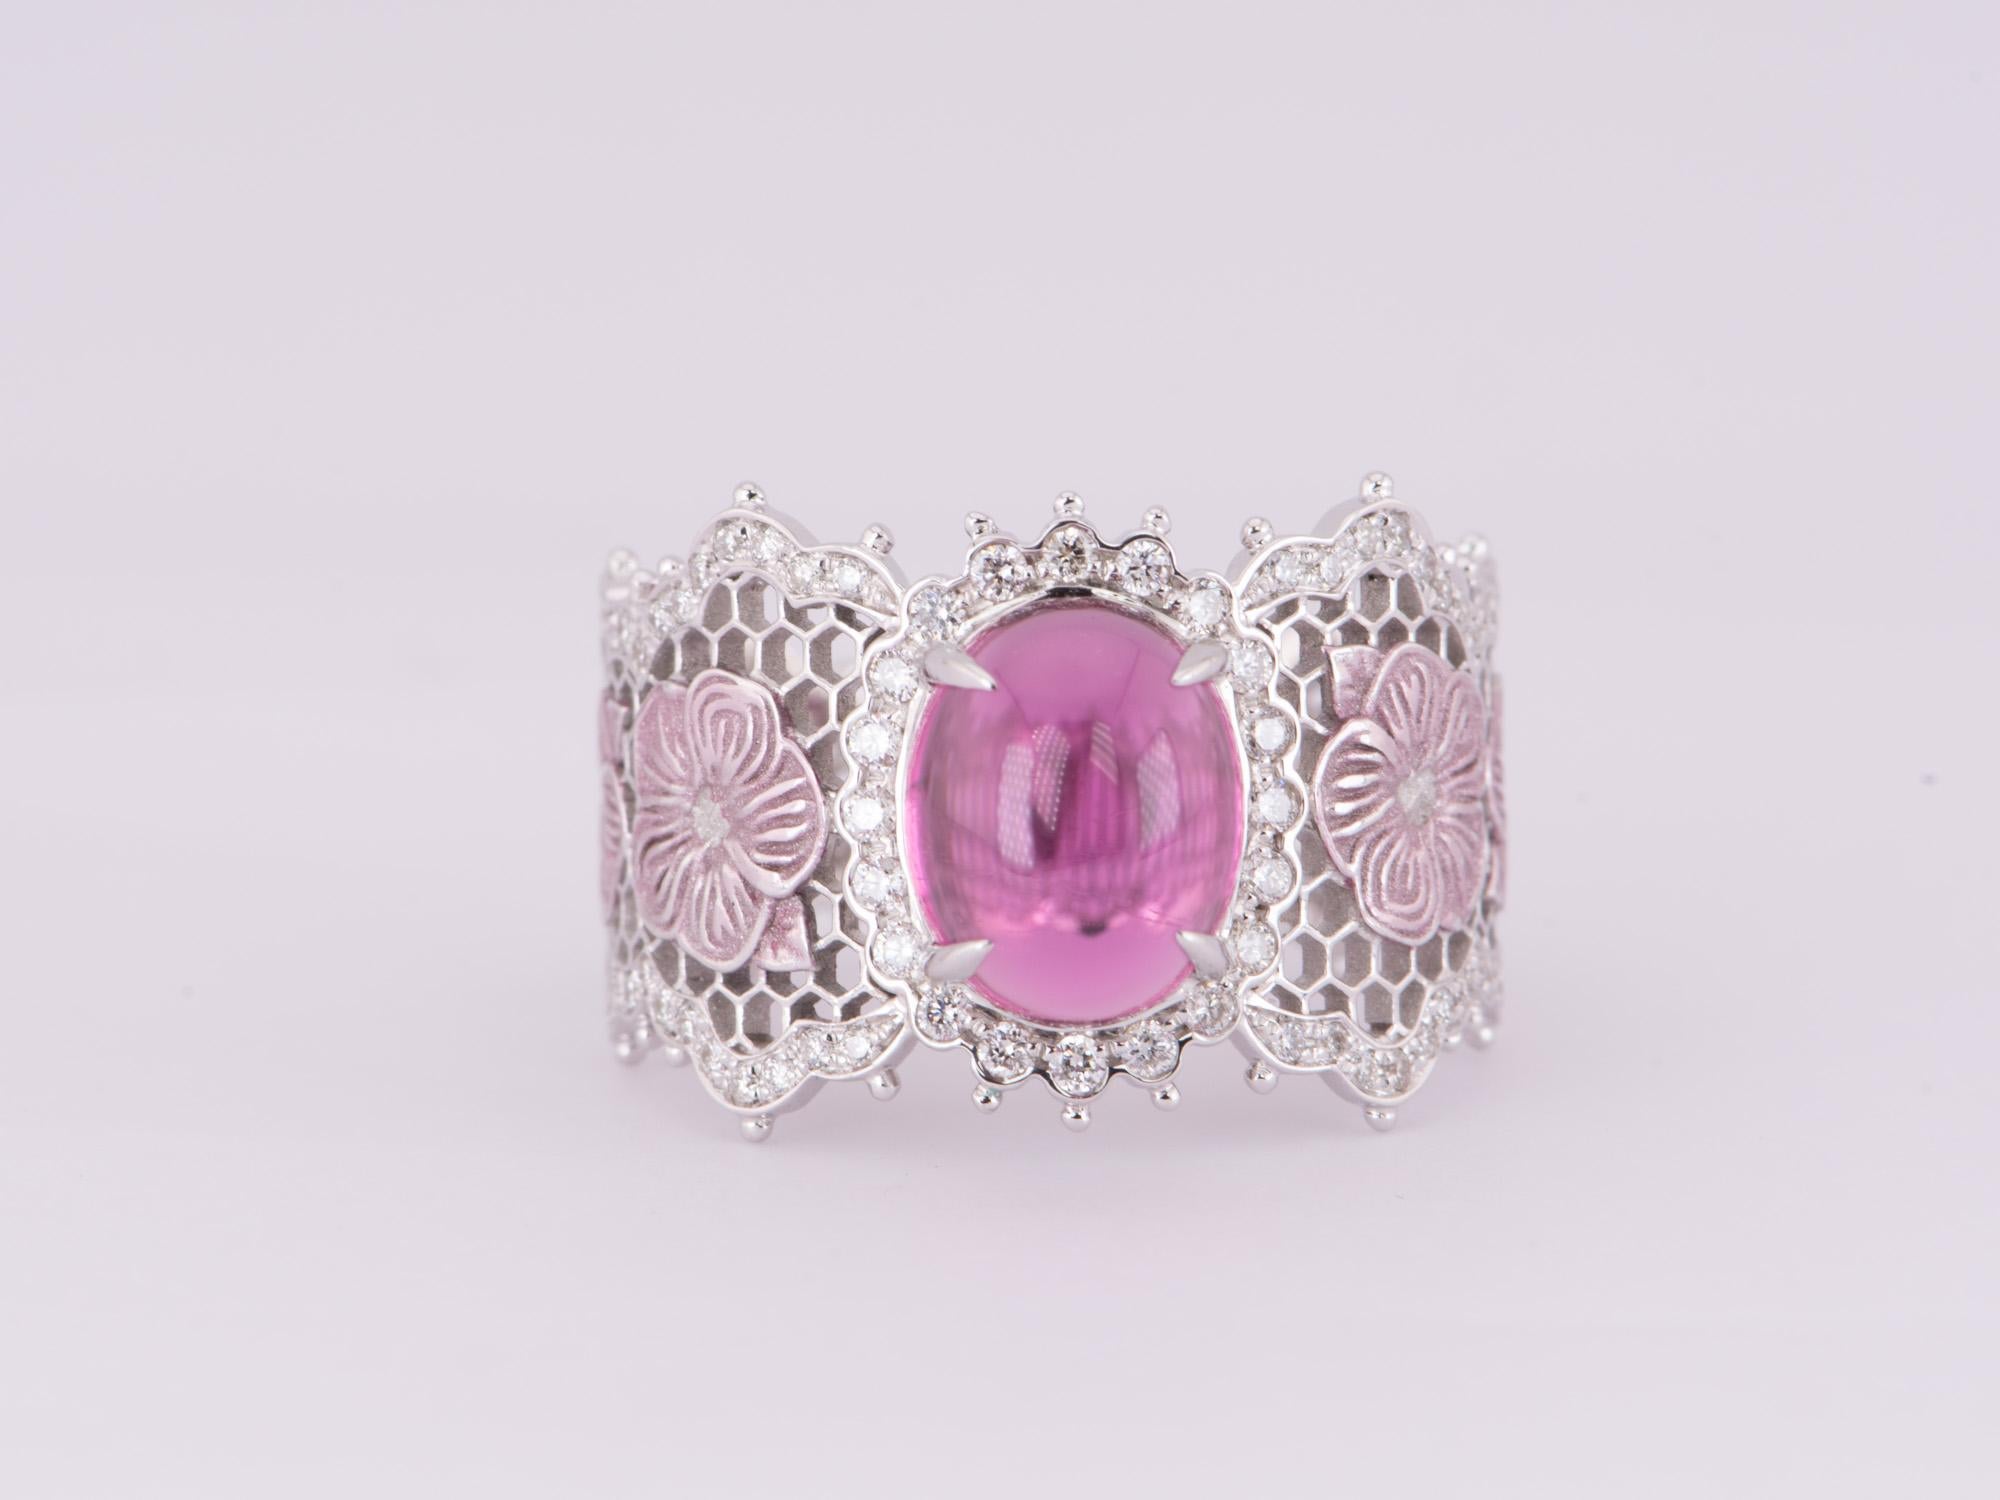 ♥ 2.52ct Rubellite Tourmaline Ring 18K White Gold Wide Band Intricate Lace and Pink Floral Design
♥ The item measures 14mm in length, 10.5mm in width, and 6mm in height.
♥ Ring size: US Size 7.75 (Free resizing up or down 1 size)
♥ Material: 18K